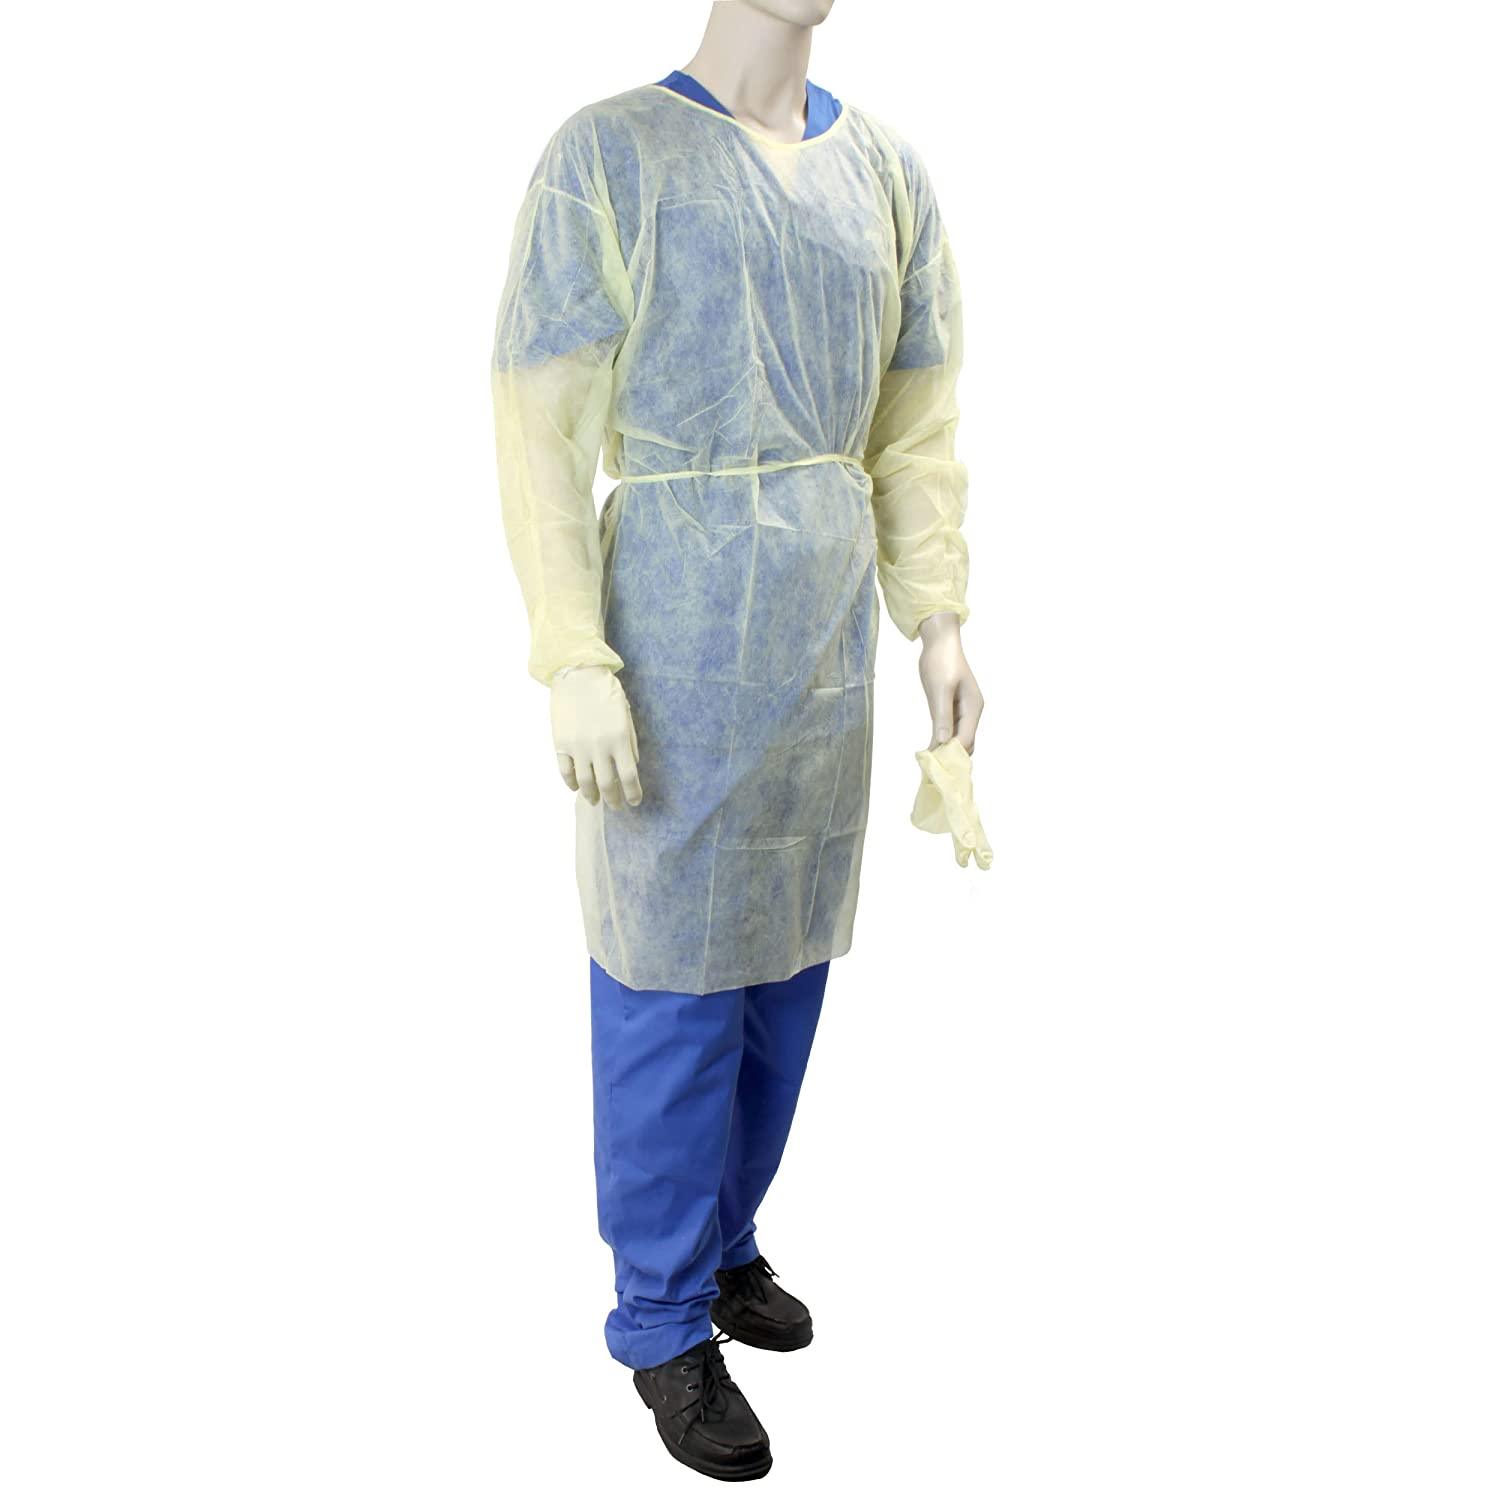 THUMBS UP GOWN IMPERVIOUS YELLOW PE SIZE XL X 1 – Solmed Medical Supplies